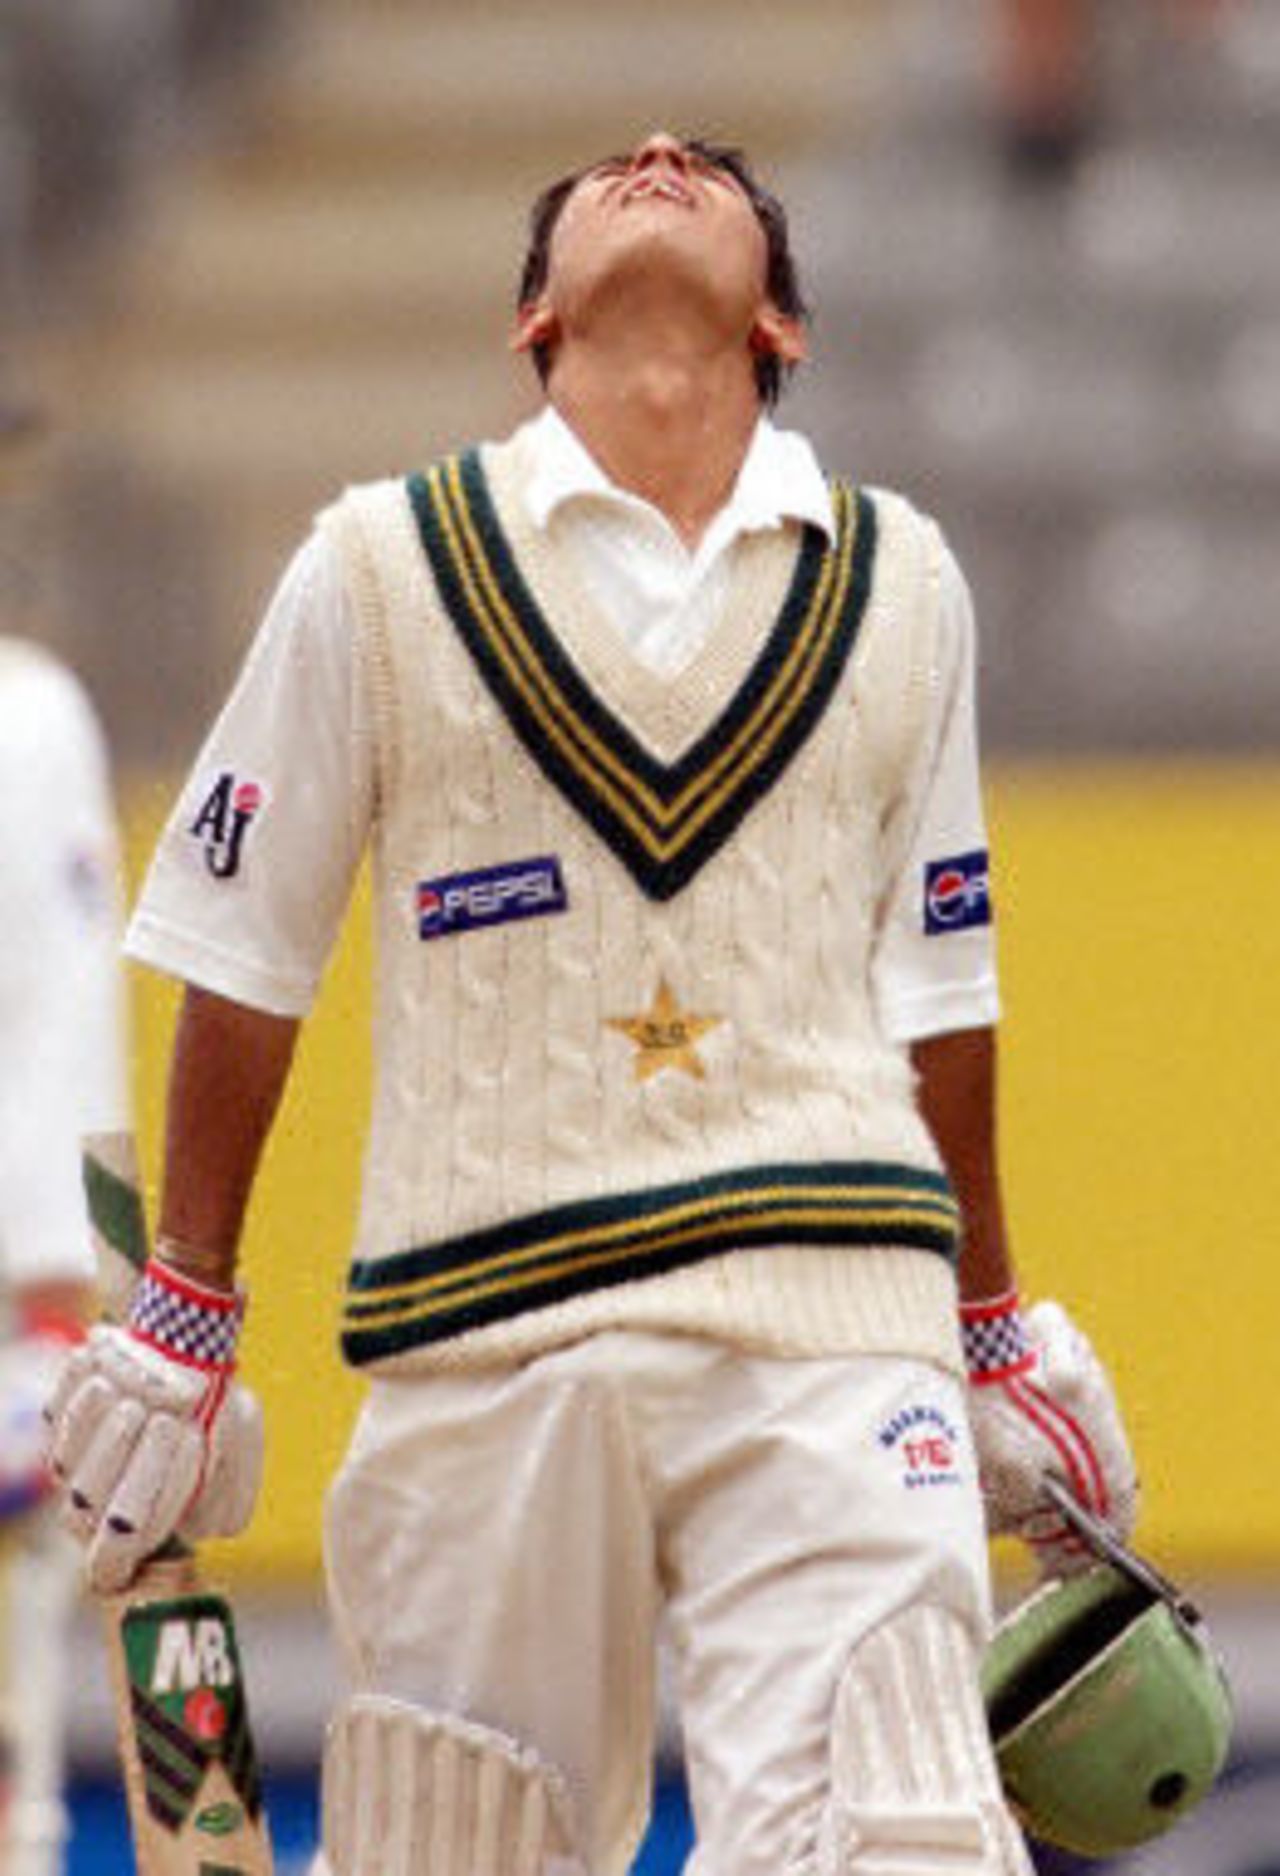 Faisal Iqbal shows relief after scoring his first test half century, day 4, 1st Test at Eden Park in Auckland, 8-12 March 2001.